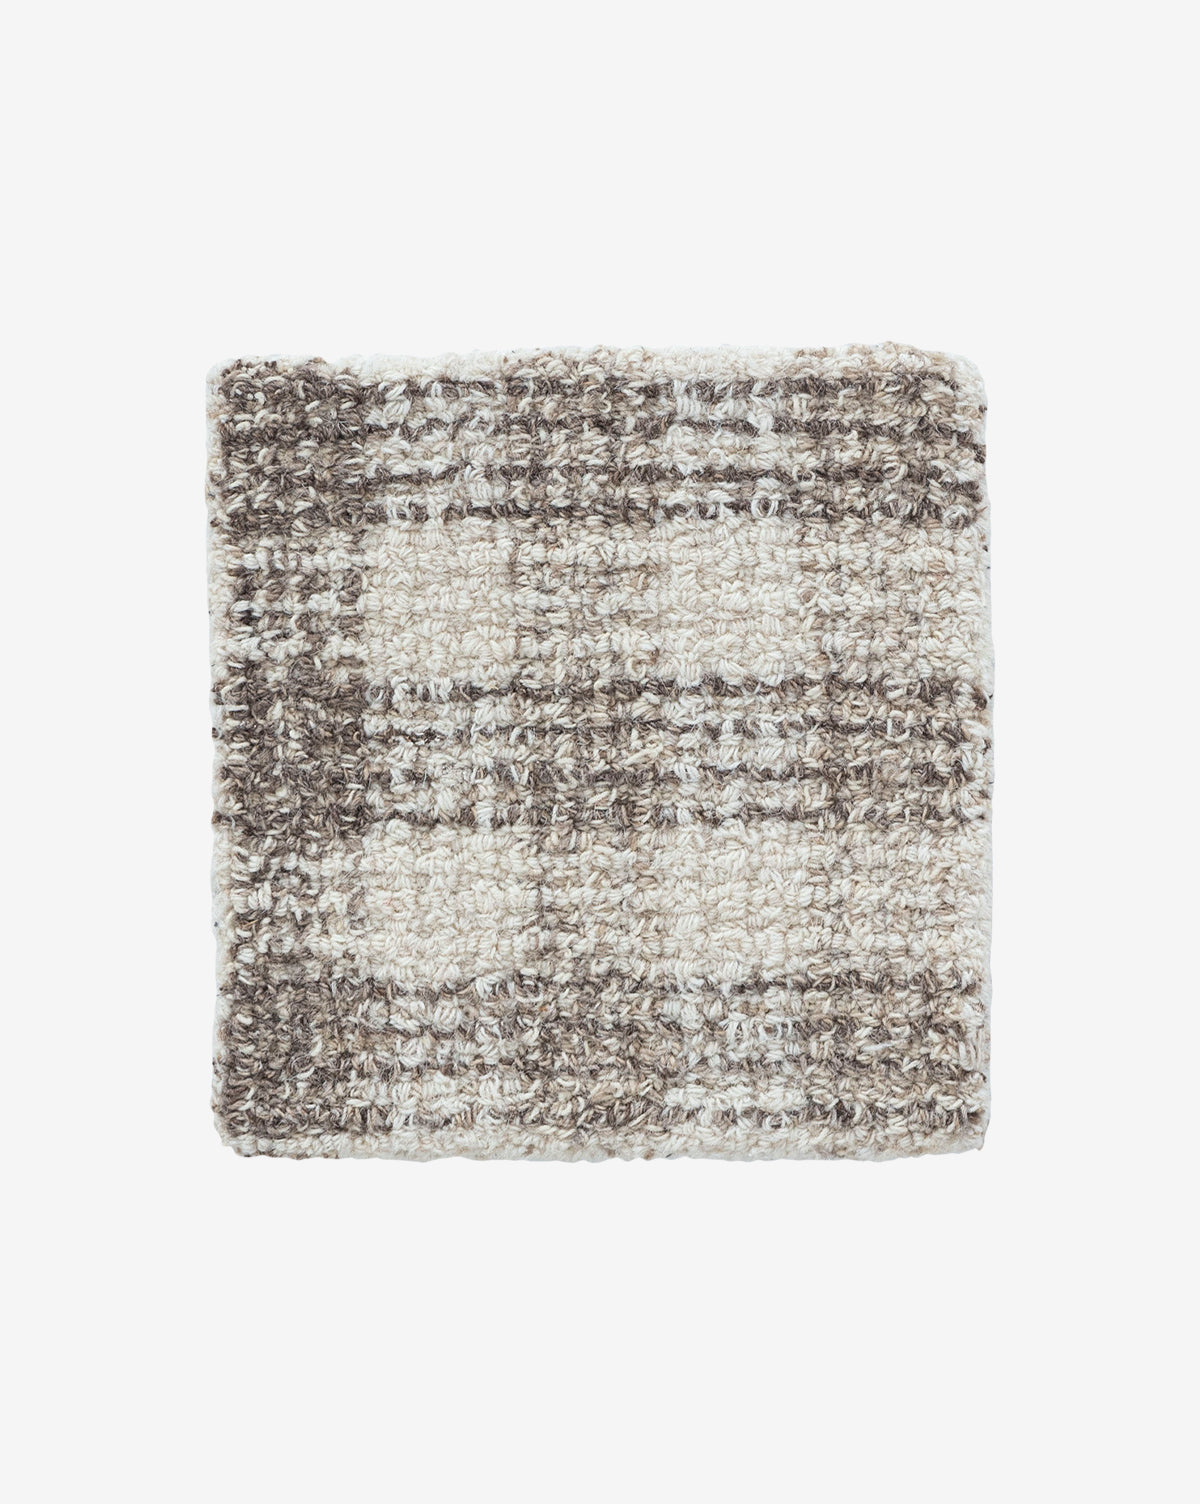 Obeetee, Walter Hand-Tufted Wool Rug Swatch